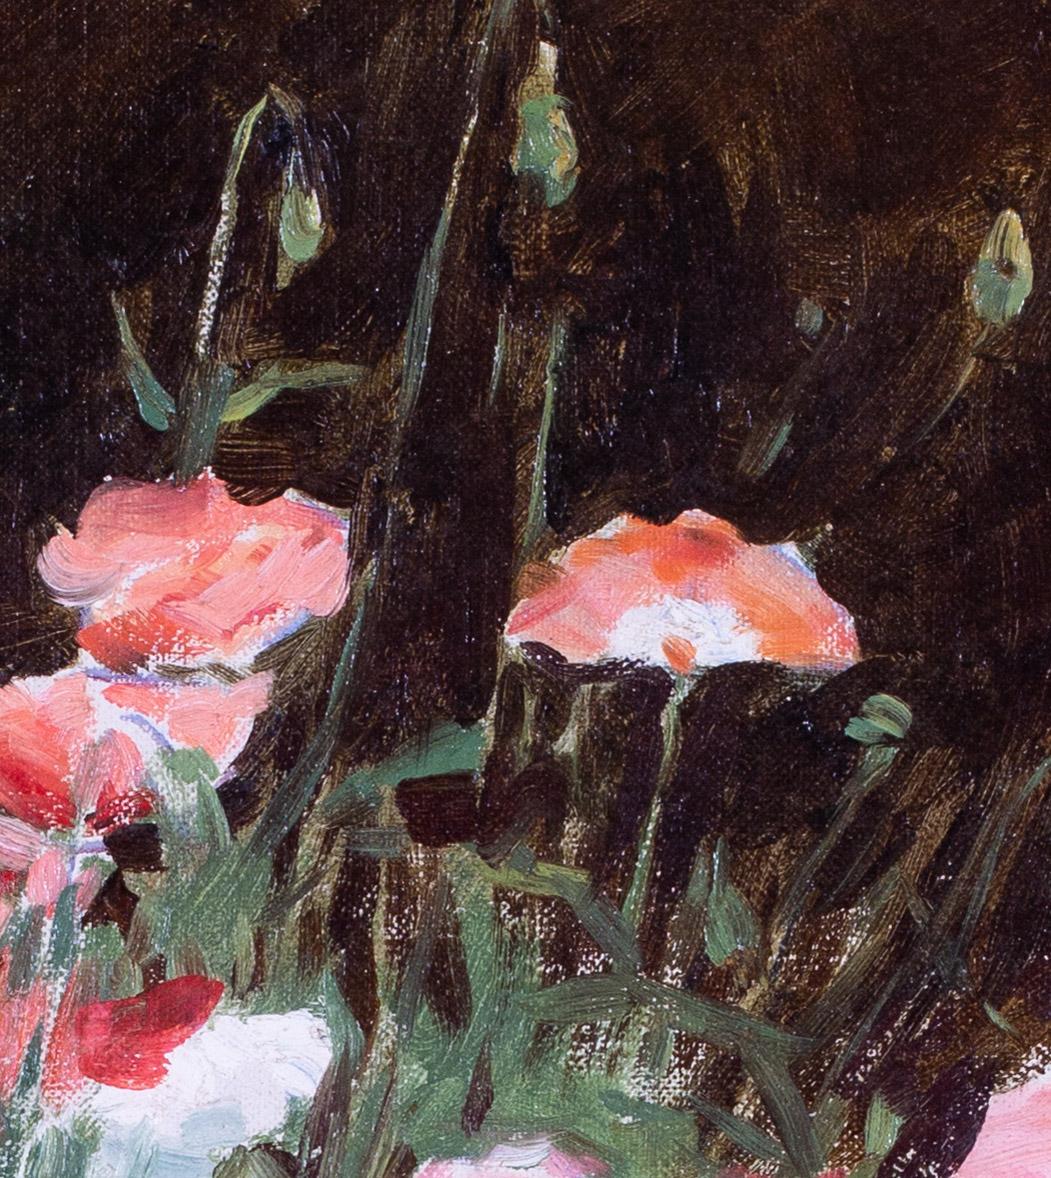 Stanhope Alexander Forbes (British, 1857-1947)
Poppies in a Meadow  
Oil on canvas laid on board
14.3/4 x 10.3/4 in. (37.5 x 25.5 cm)
Signed ‘Stanhope A. Forbes (lower right)

Stanhope Alexander Forbesis regarded as the founder and leader of the